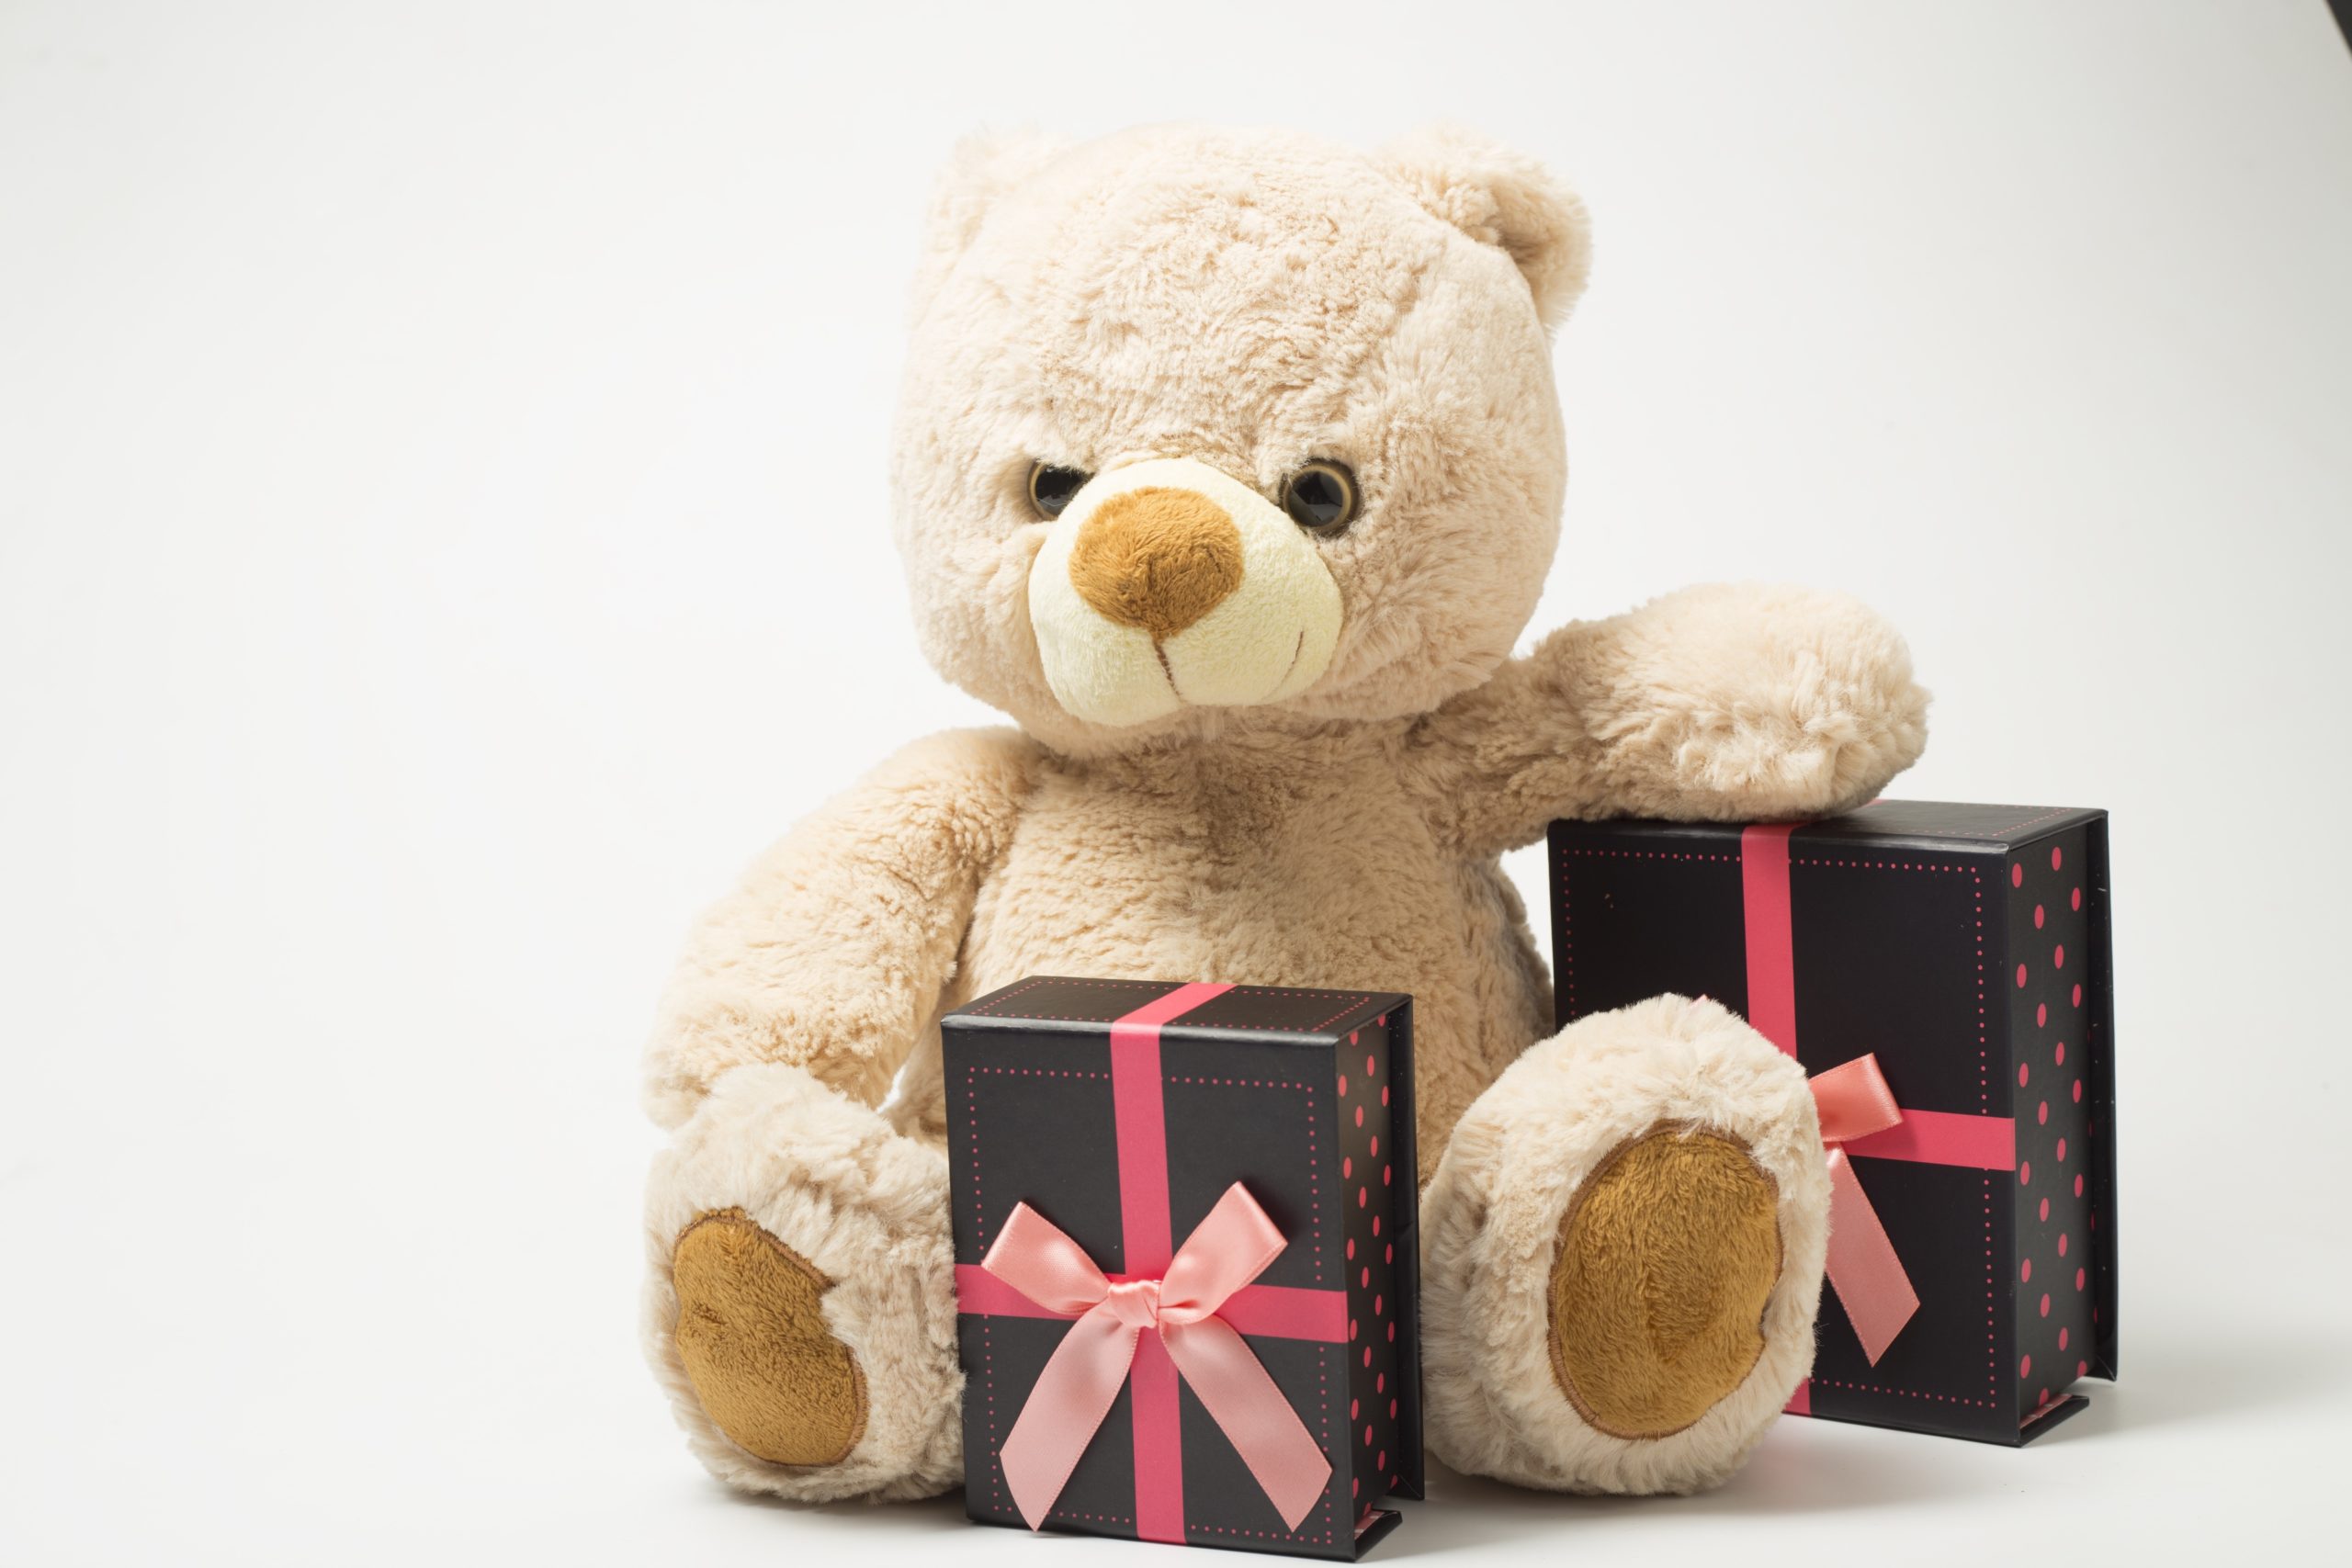 A stuffed bear and boxed gifts